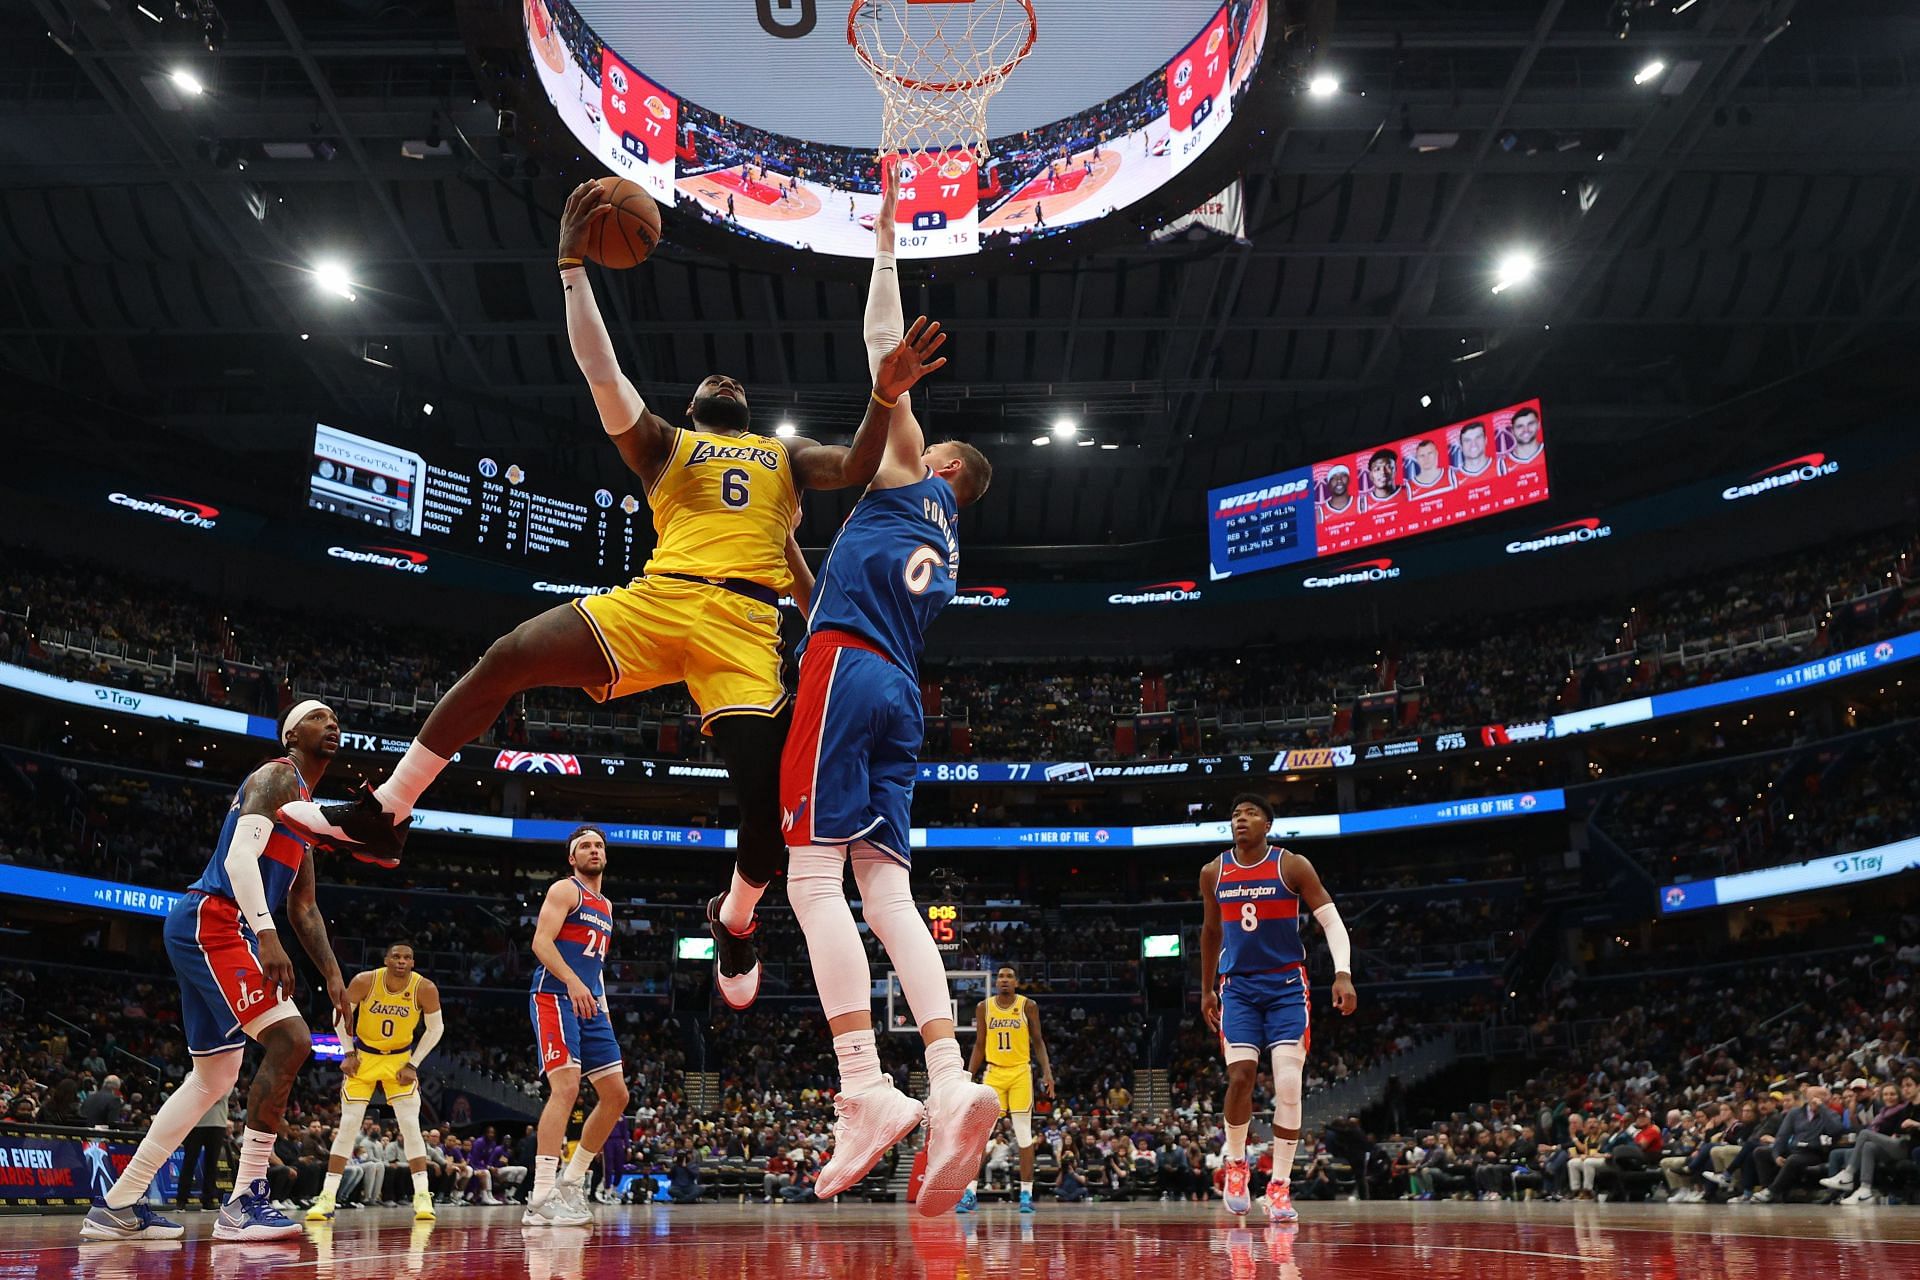 LeBron James #6 of the Los Angeles Lakers shoots the ball against Kristaps Porzingis #6 of the Washington Wizards